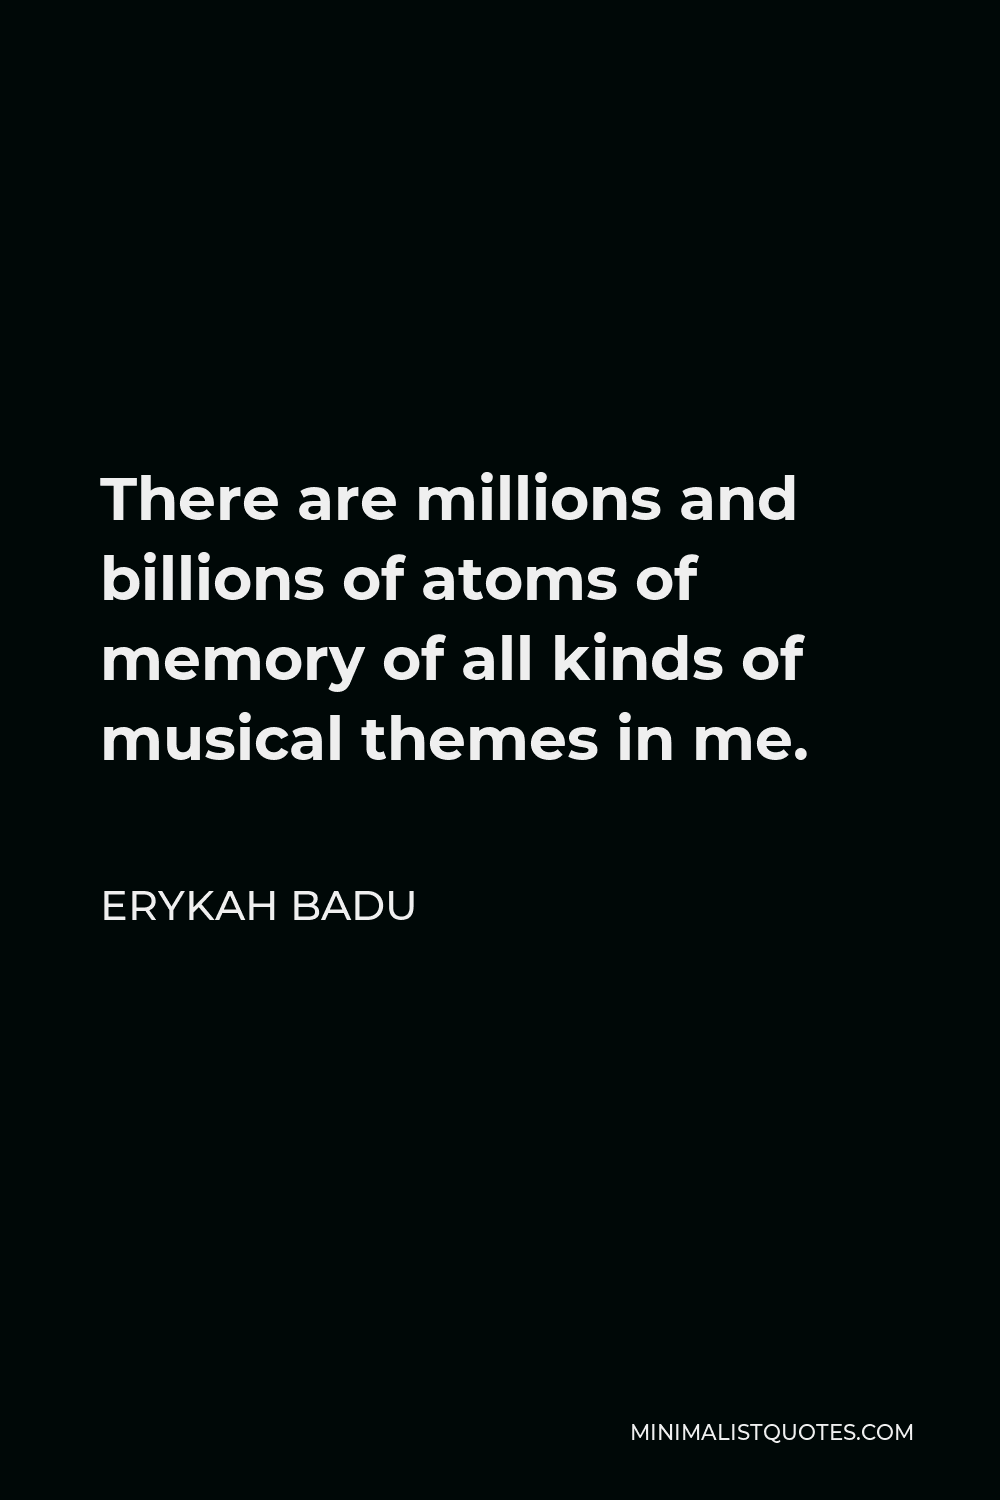 Erykah Badu Quote - There are millions and billions of atoms of memory of all kinds of musical themes in me.